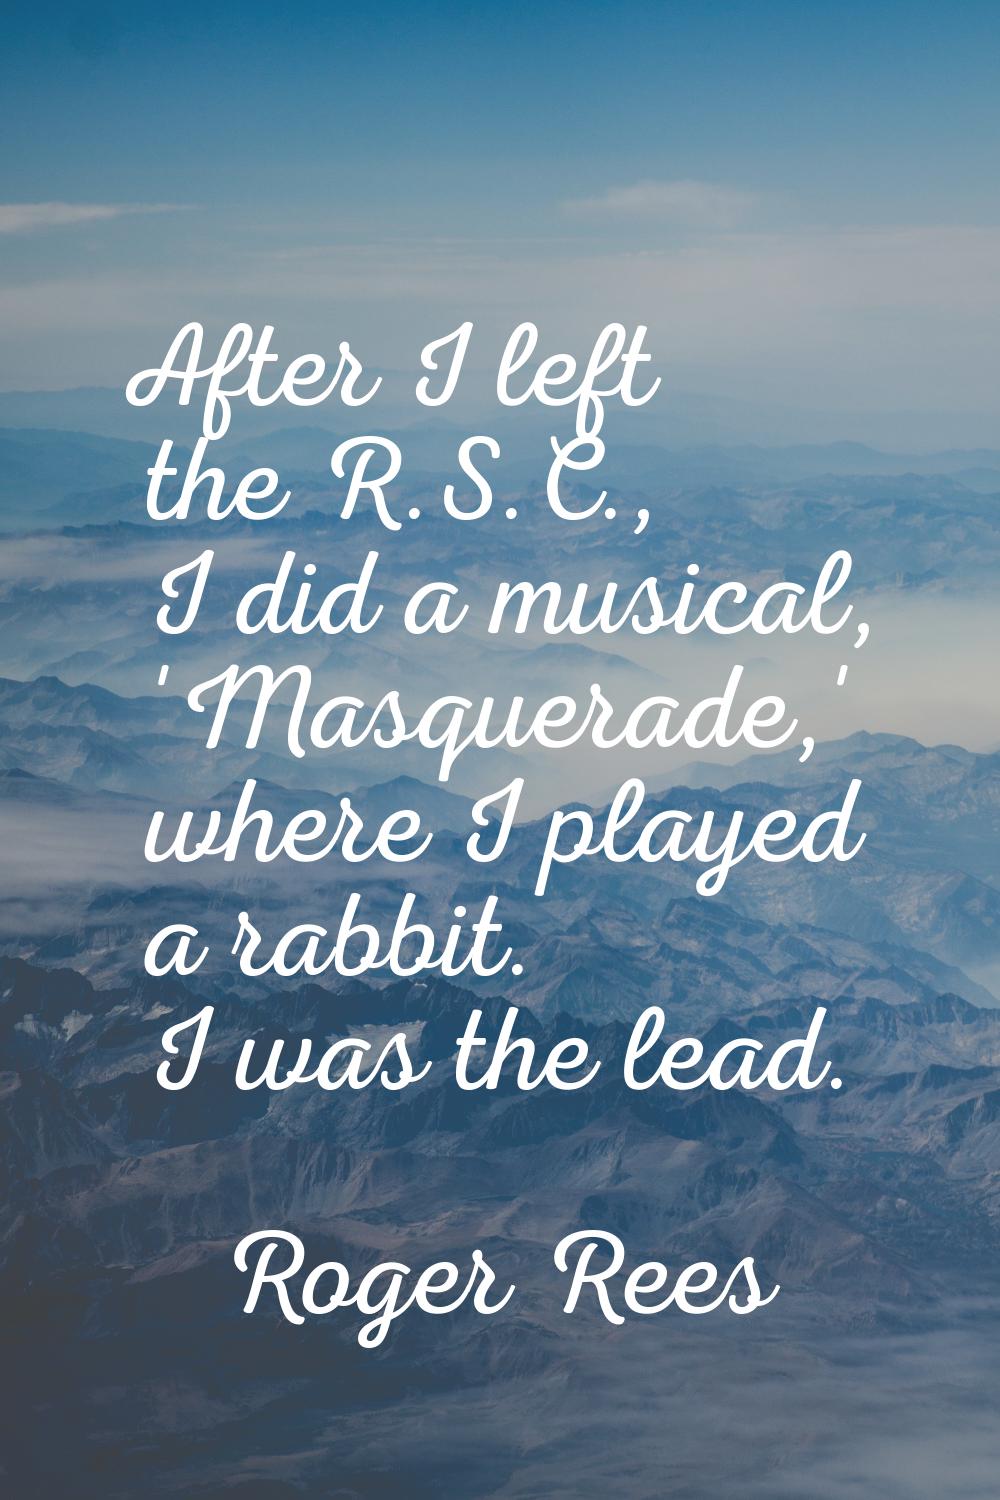 After I left the R.S.C., I did a musical, 'Masquerade,' where I played a rabbit. I was the lead.